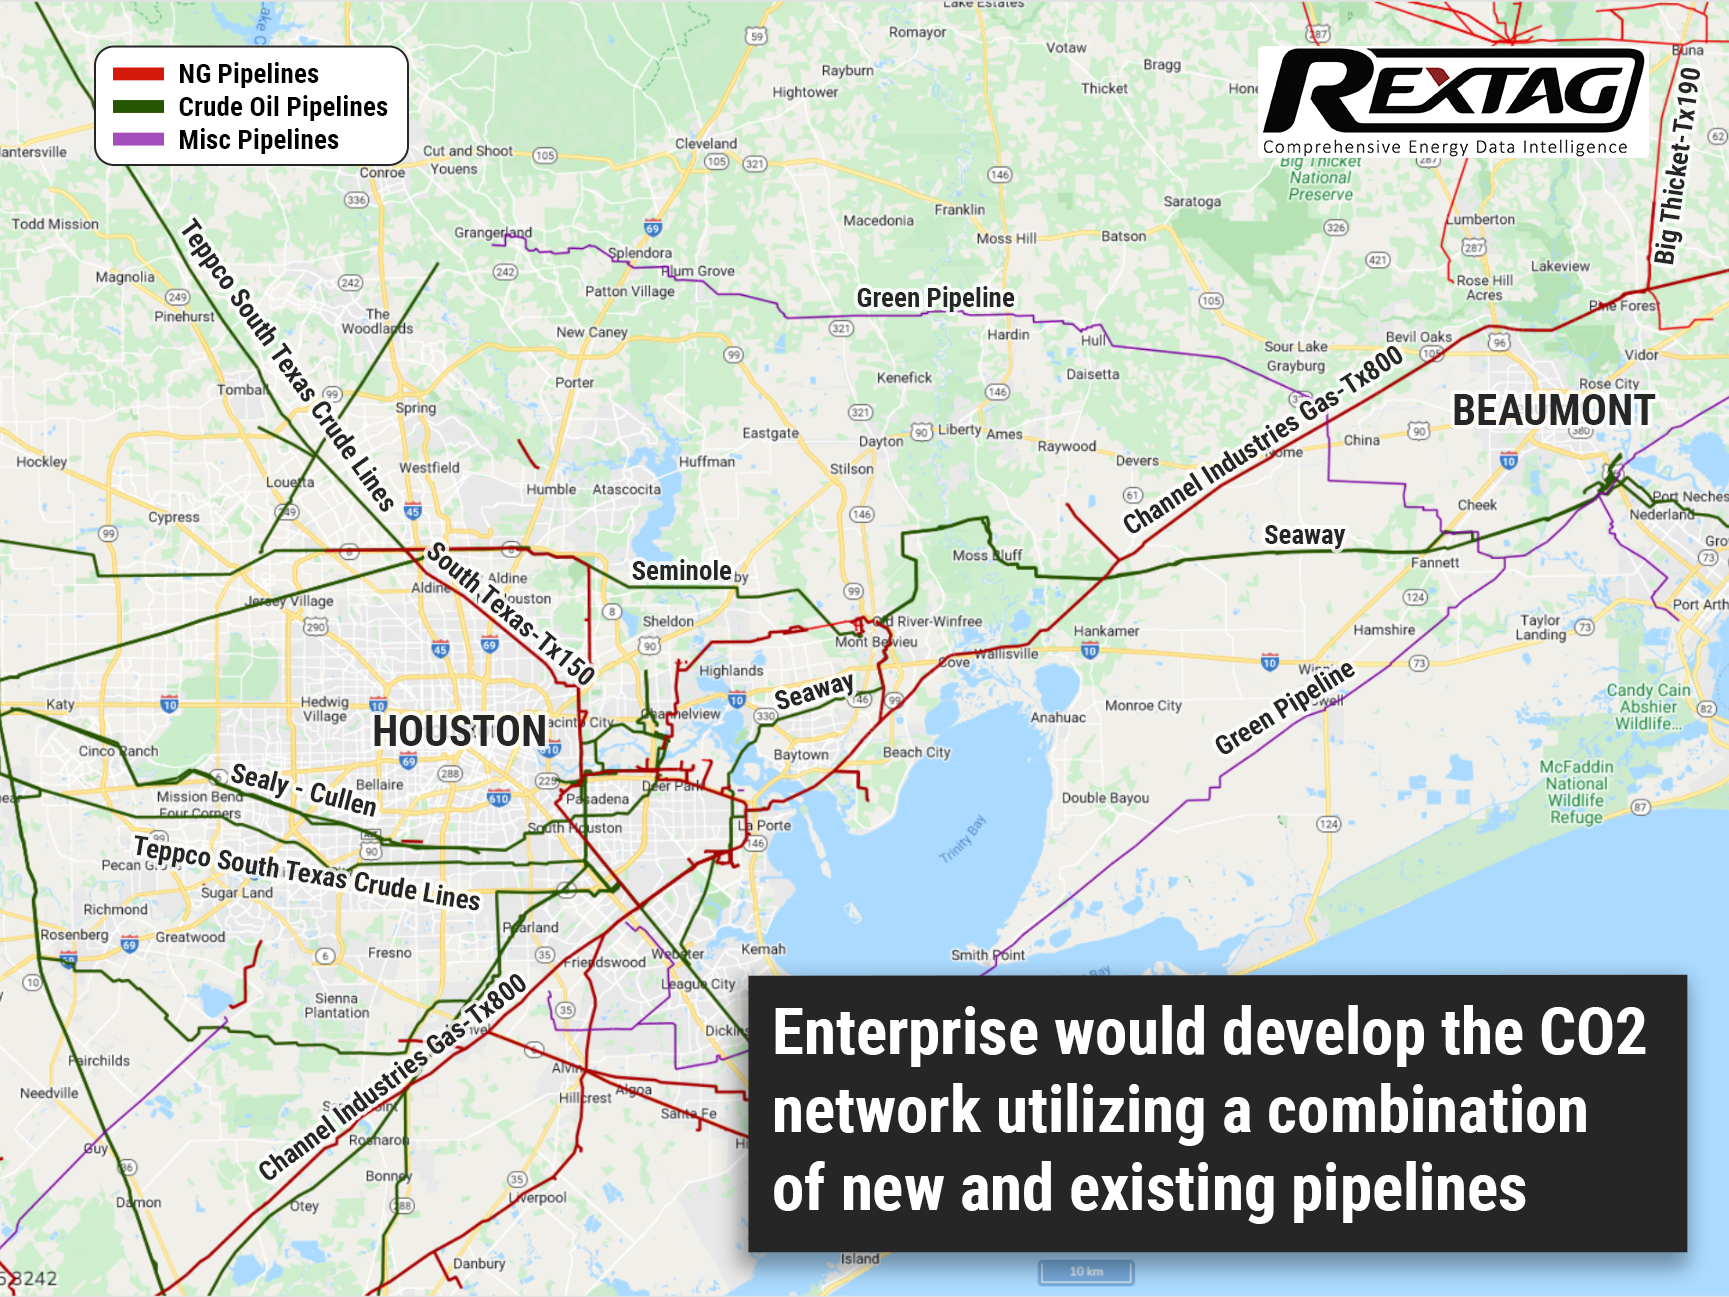 Enterprise-Oxy-Low-Carbon-Ventures-Will -oin-Efforts-on-Houston-Area-CO2-Project